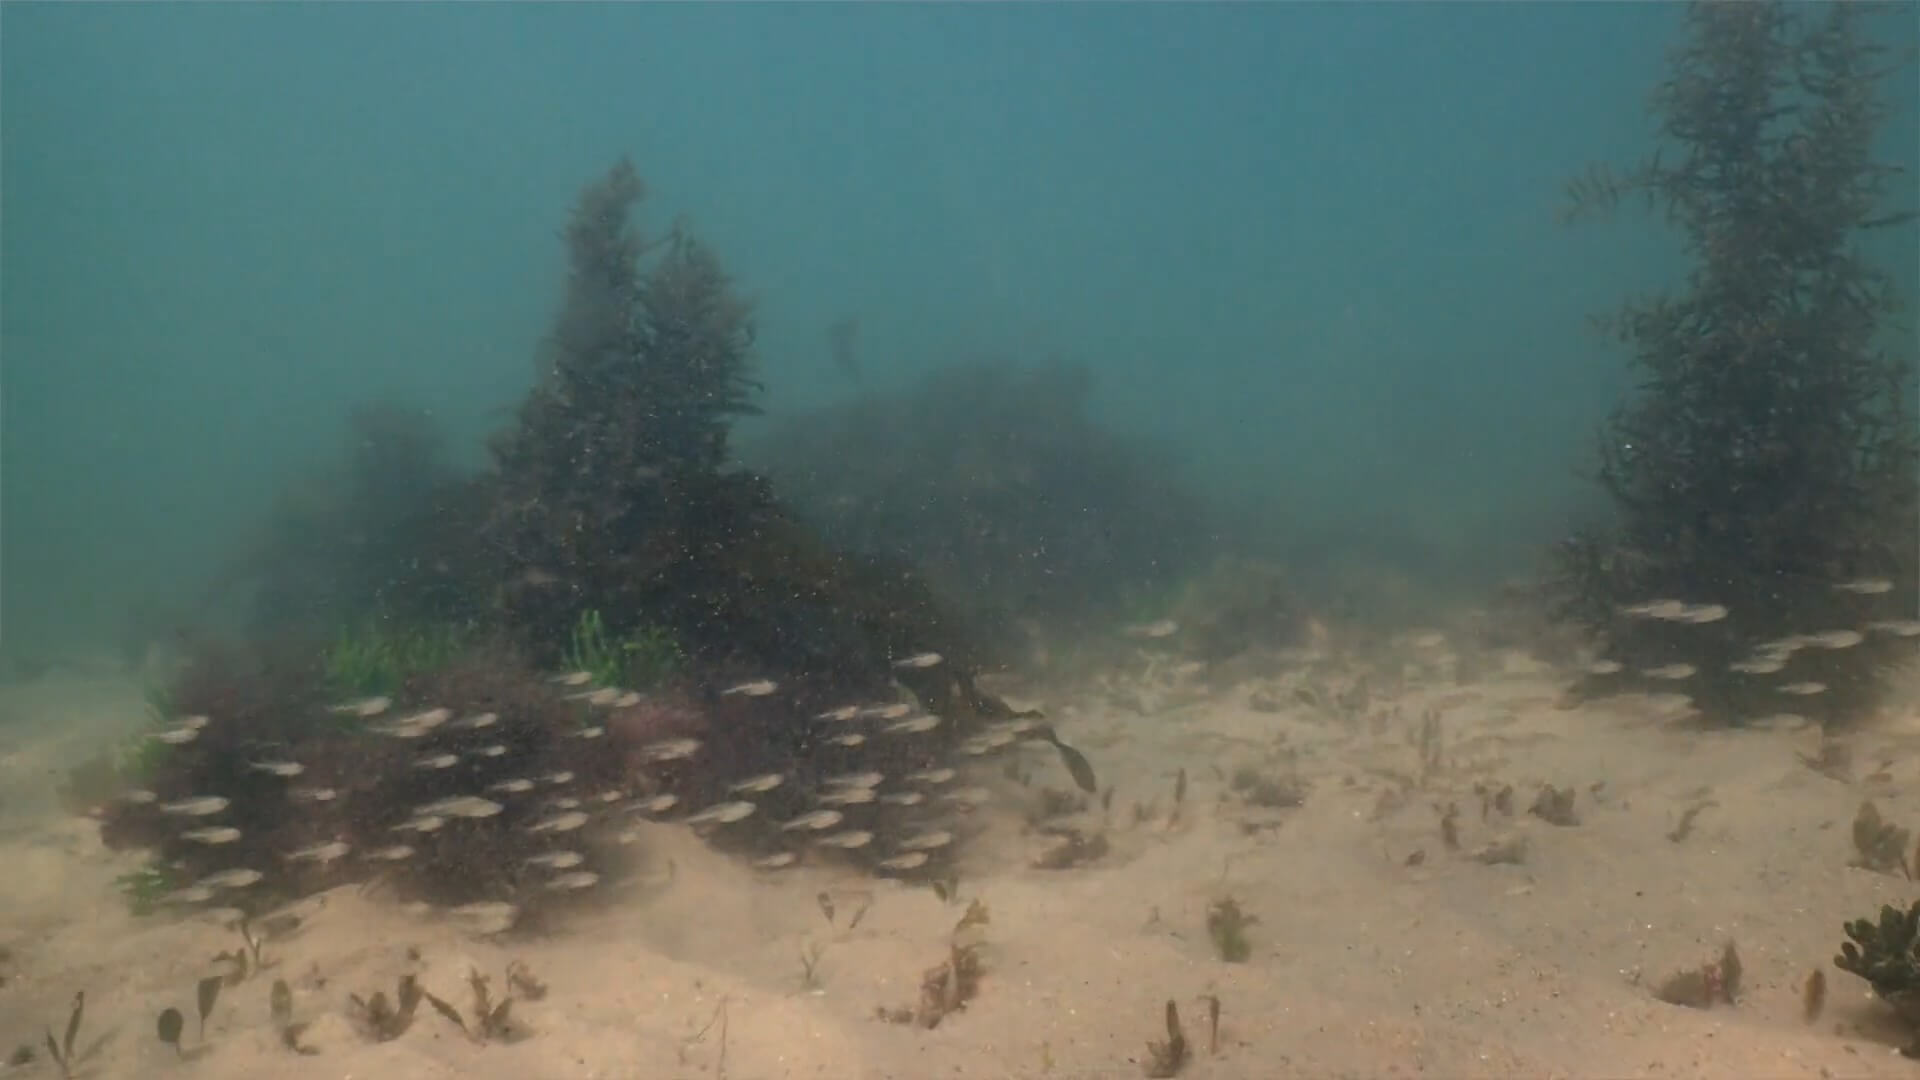 A group of fish swimming along the seabed, underwater.